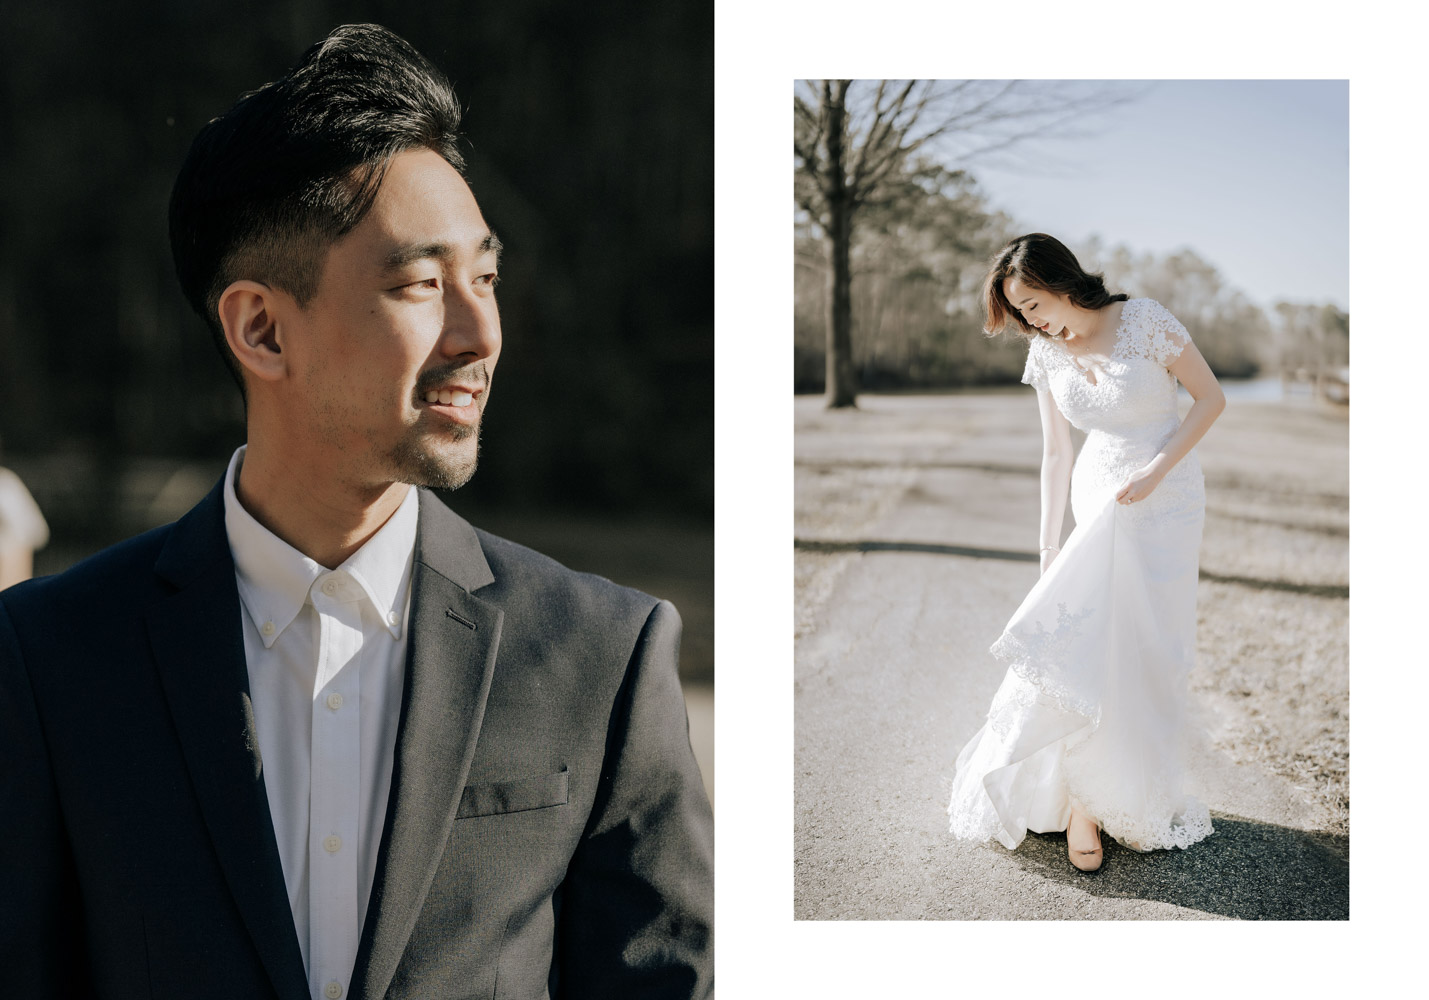 Toan and Thuy's Breathtaking Wedding Film